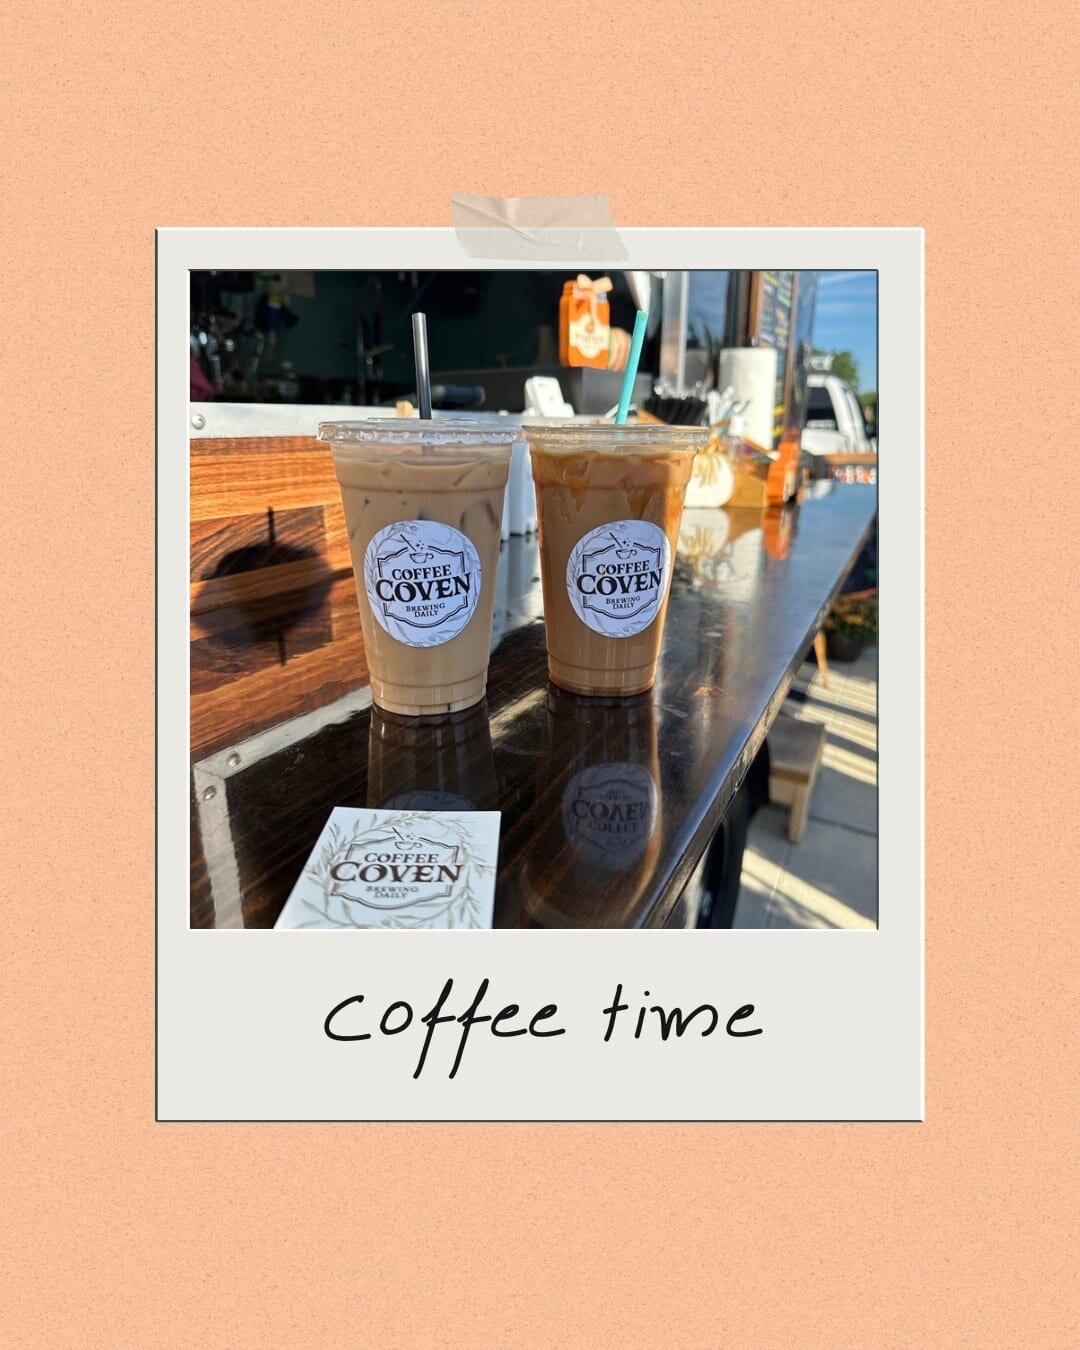 We are SO excited to announce Coffee Coven's return to the Highlands THIS morning! ☕The truck will be parked behind Graham Park's clubhouse, next to the pool. Make sure you stop by and check it out before it's too late! ❗ #coffeebreak #aparmentliving